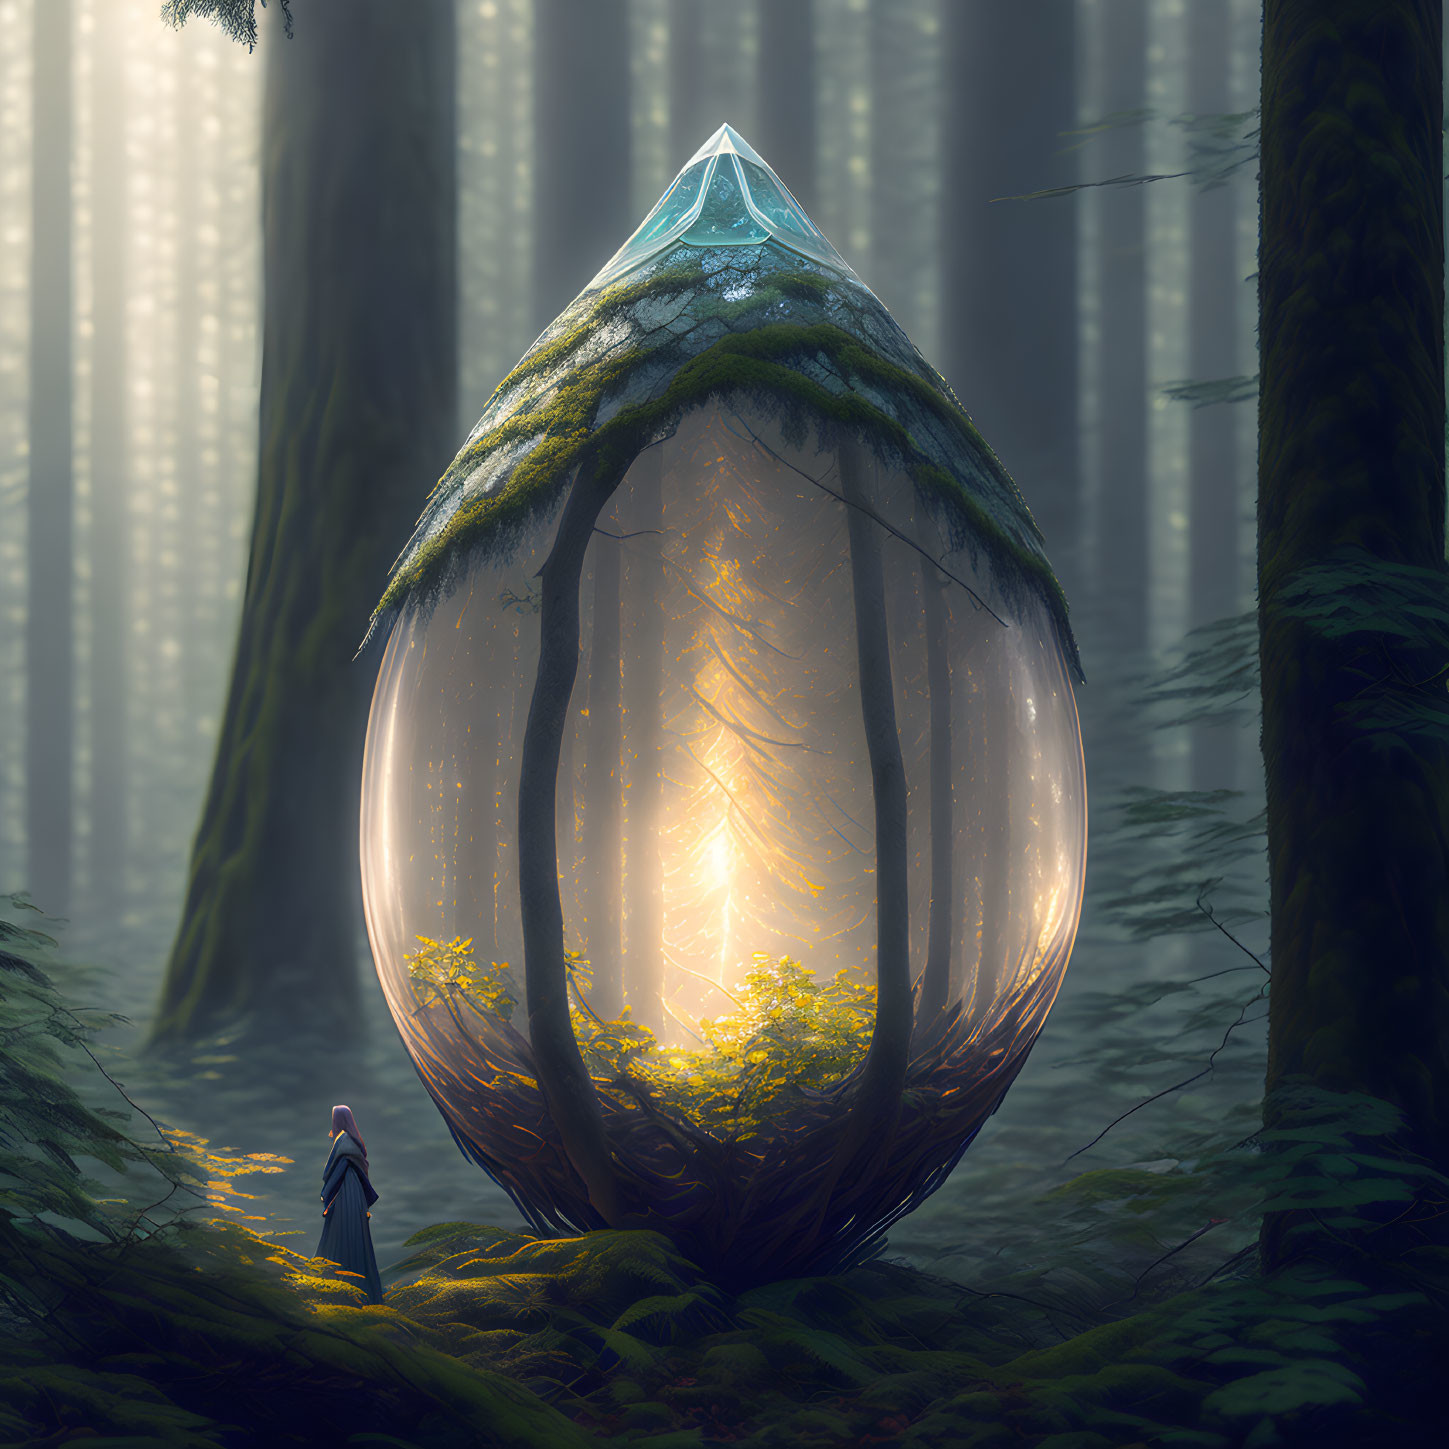 Mysterious egg-shaped structure in misty forest surrounded by lush greenery